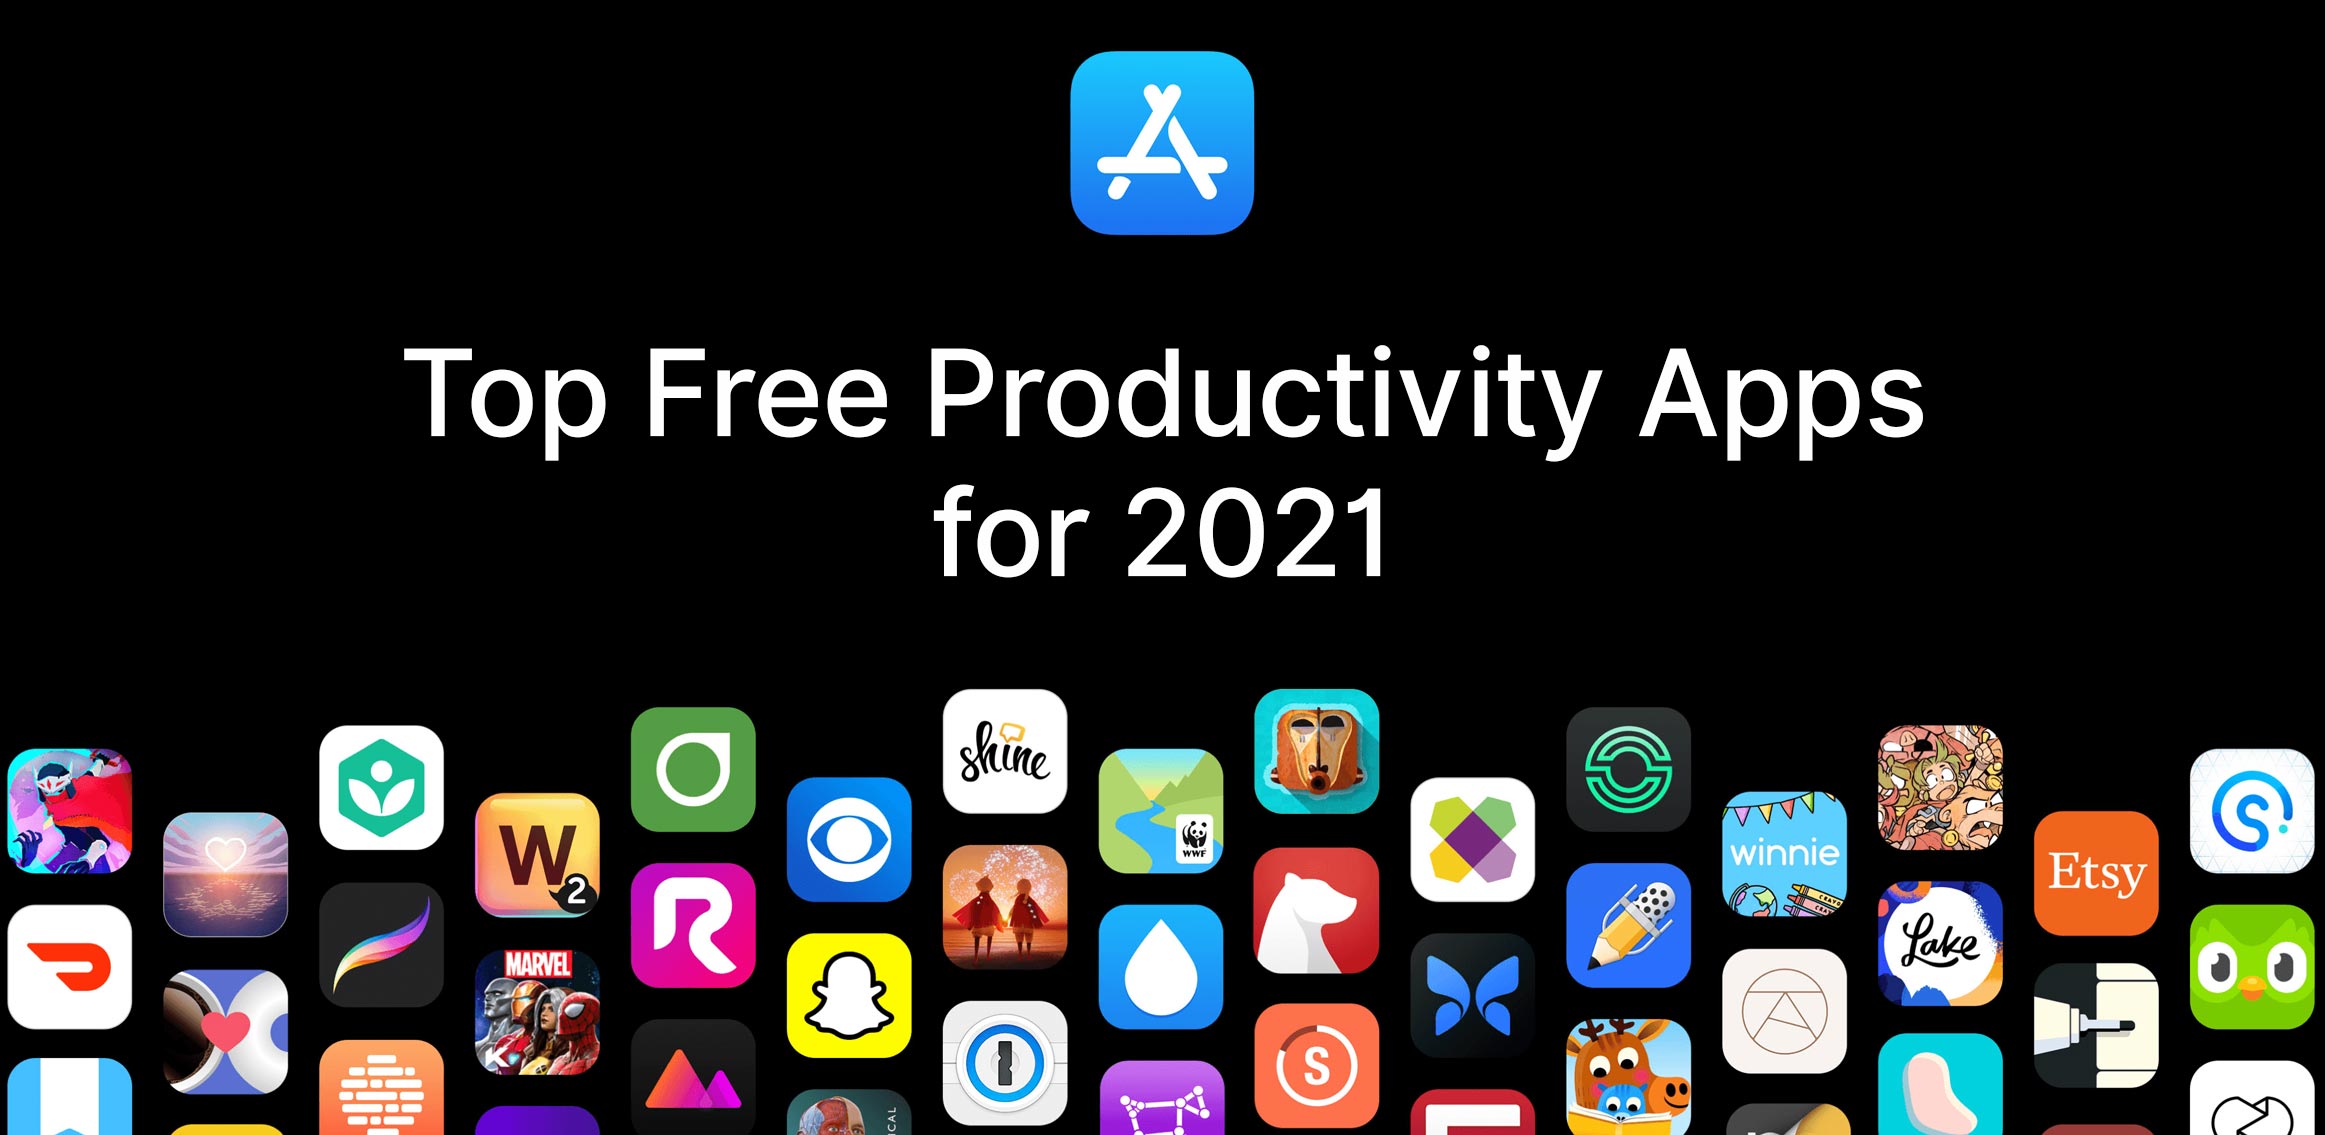 Article about Top Free Productivity Apps for 2021